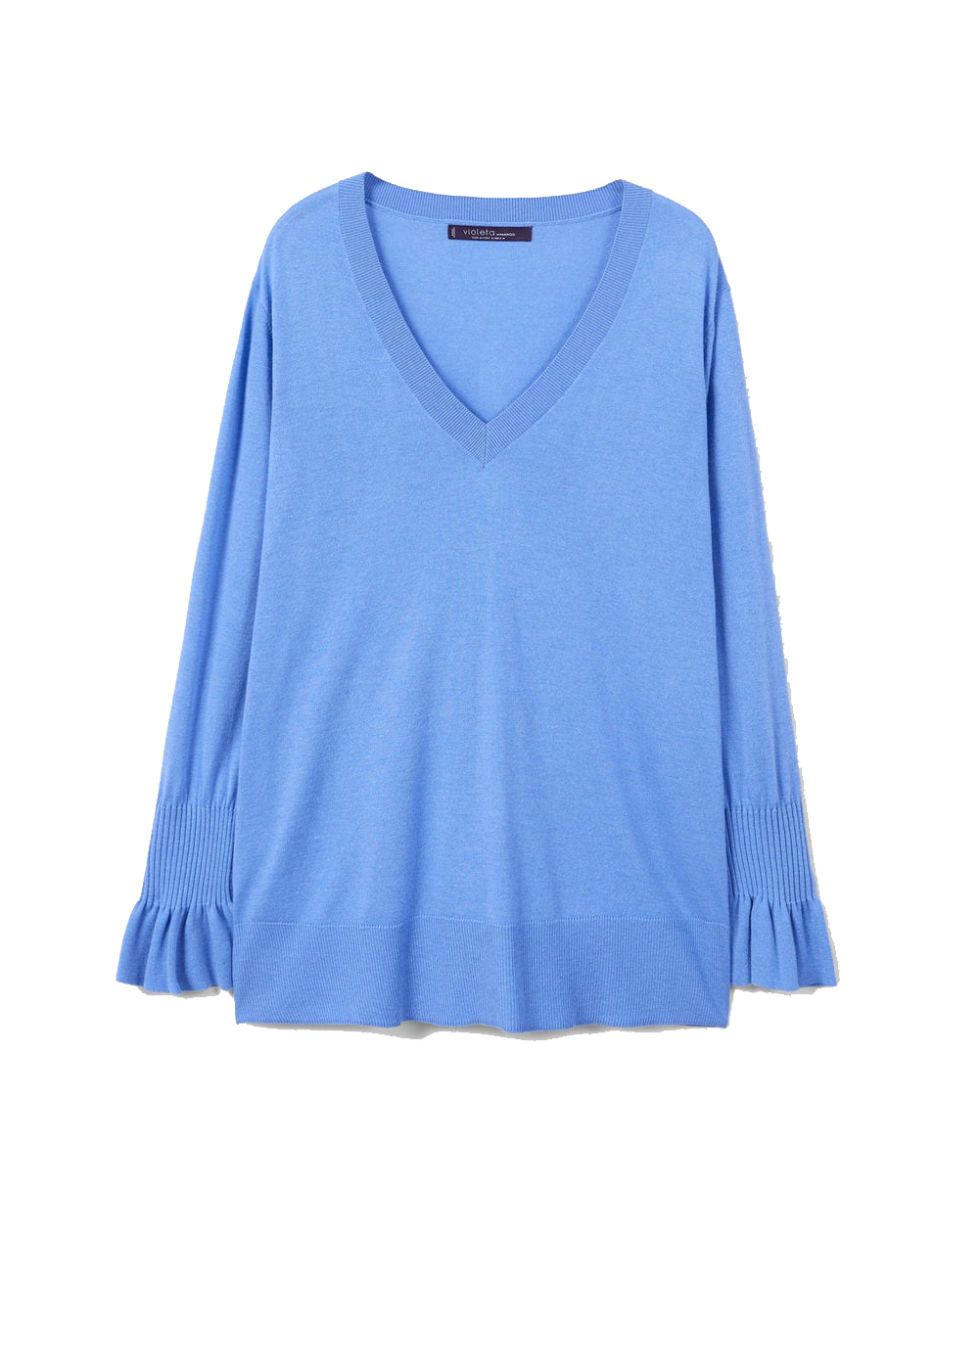 Clothing, Blue, Cobalt blue, Sleeve, Electric blue, Blouse, Turquoise, Outerwear, T-shirt, Neck, 